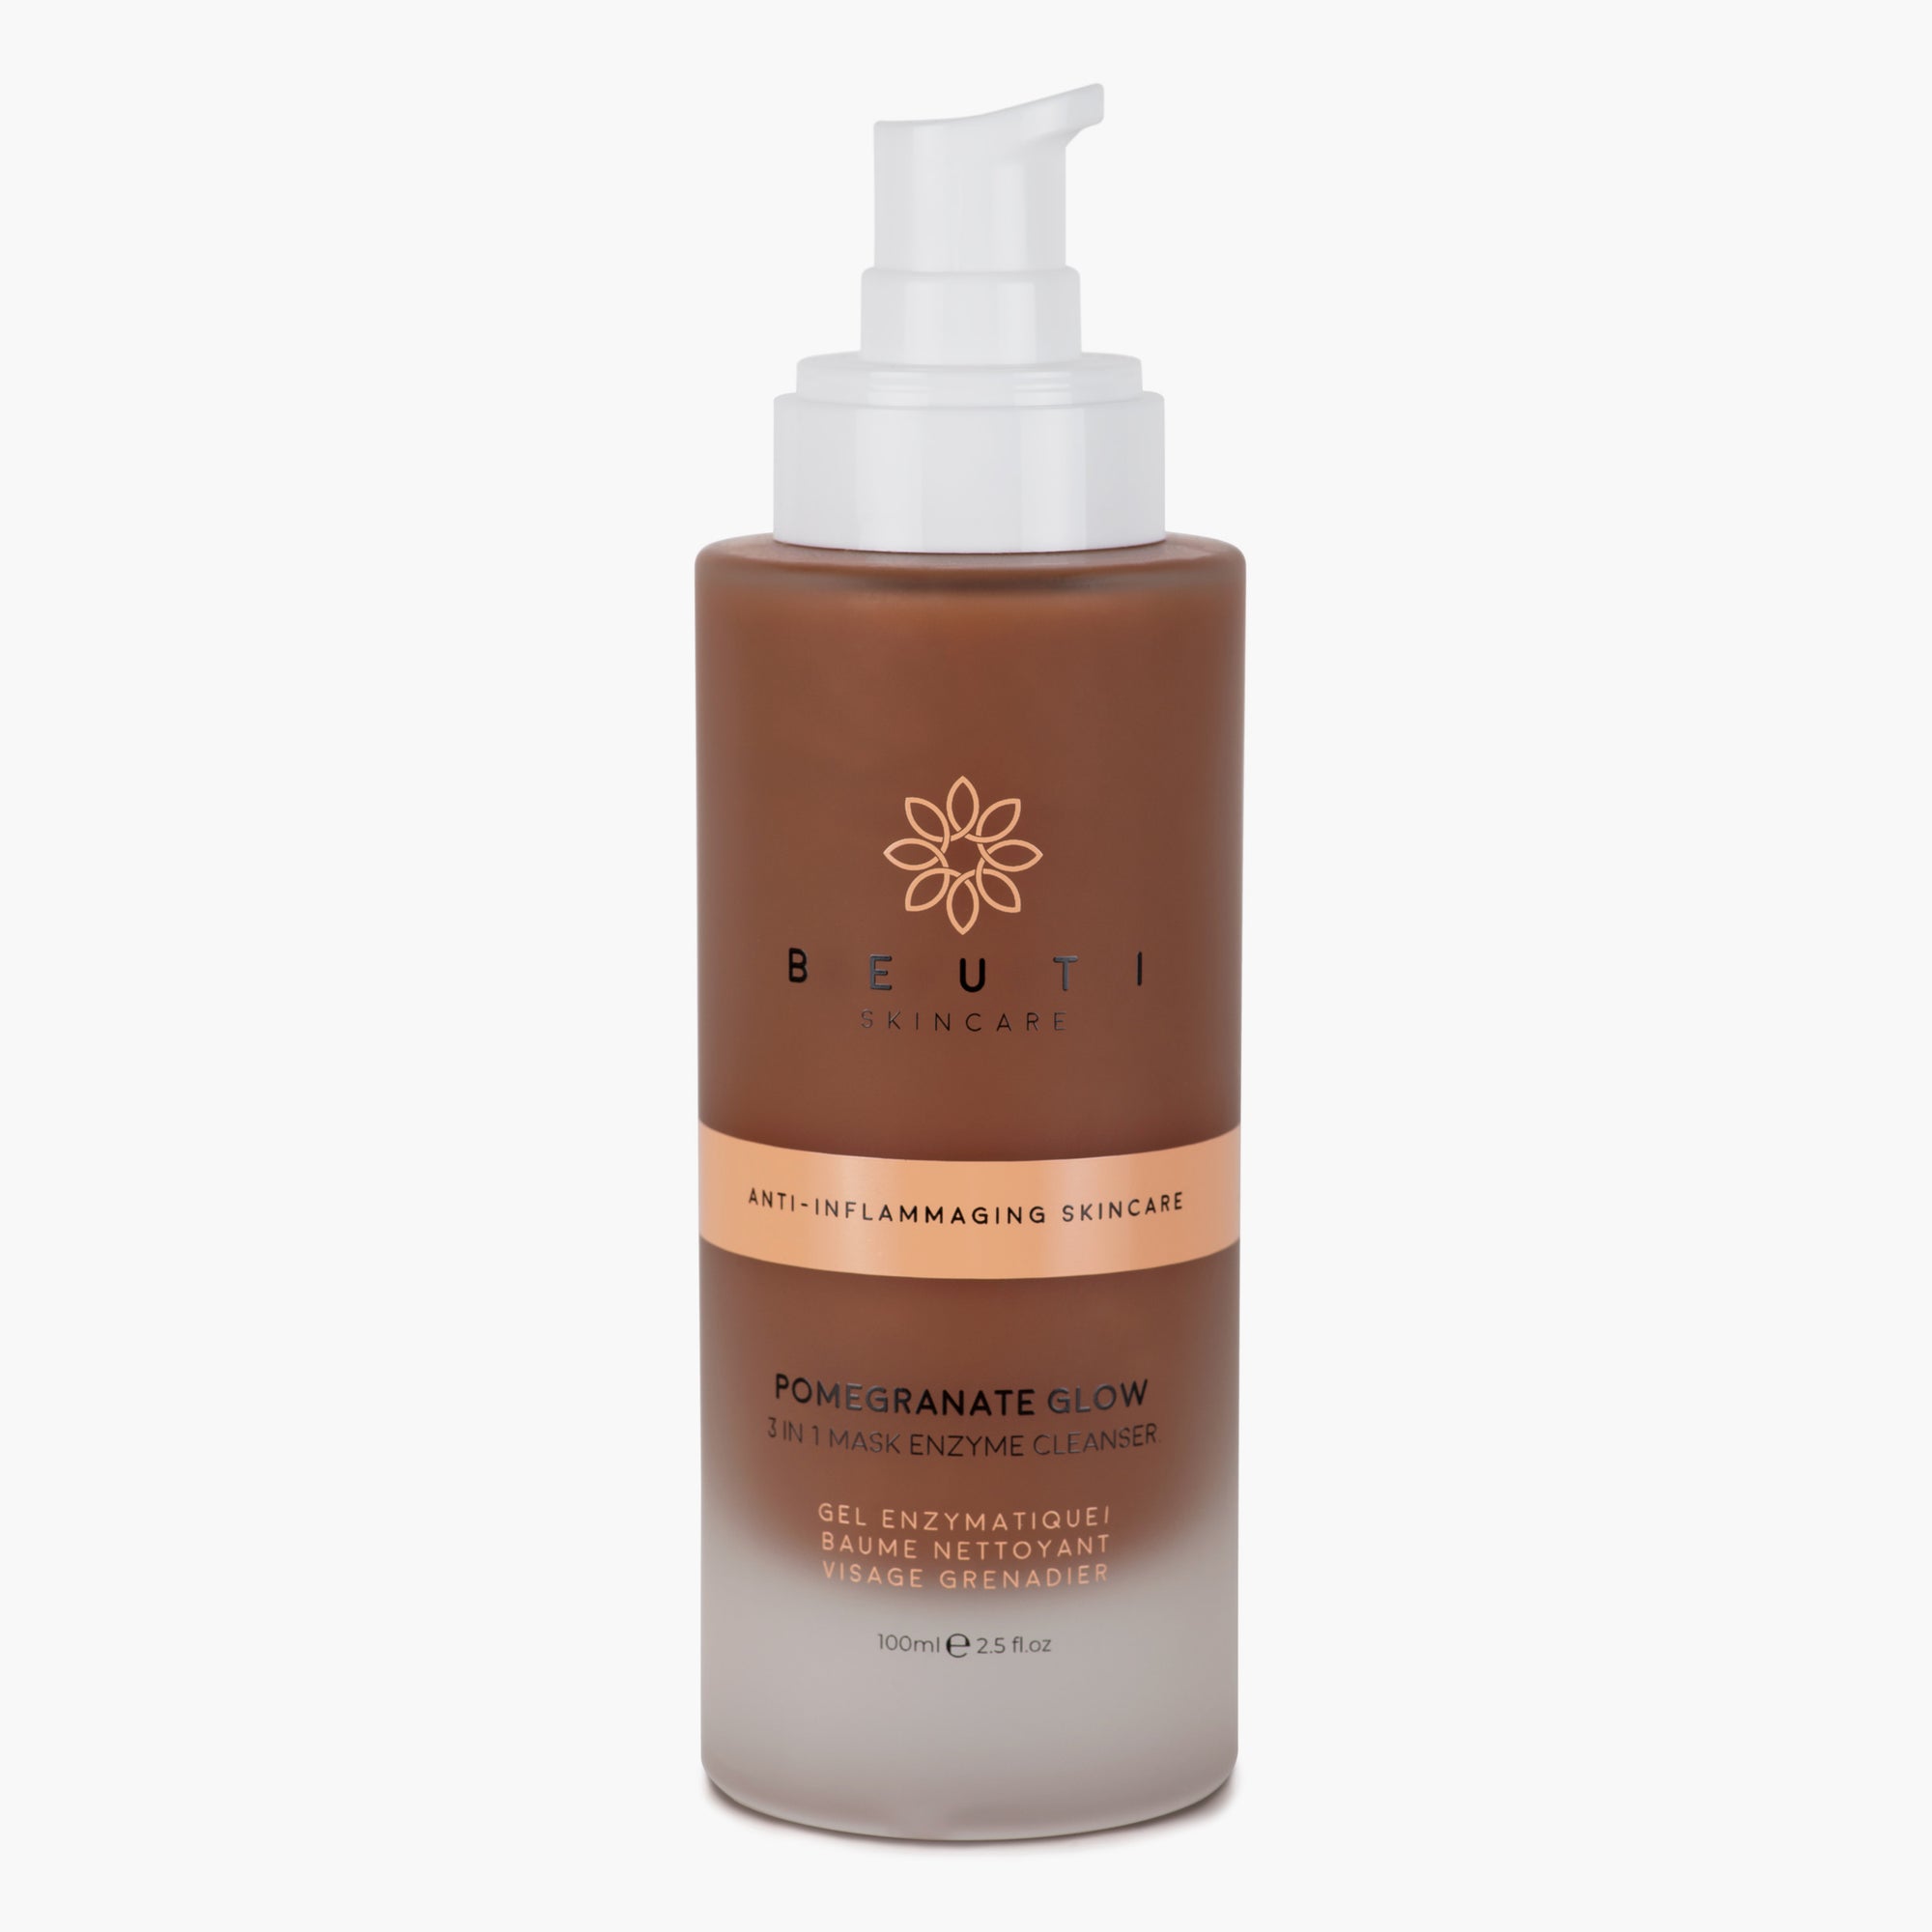 Pomegranate Glow Enzyme Cleanser